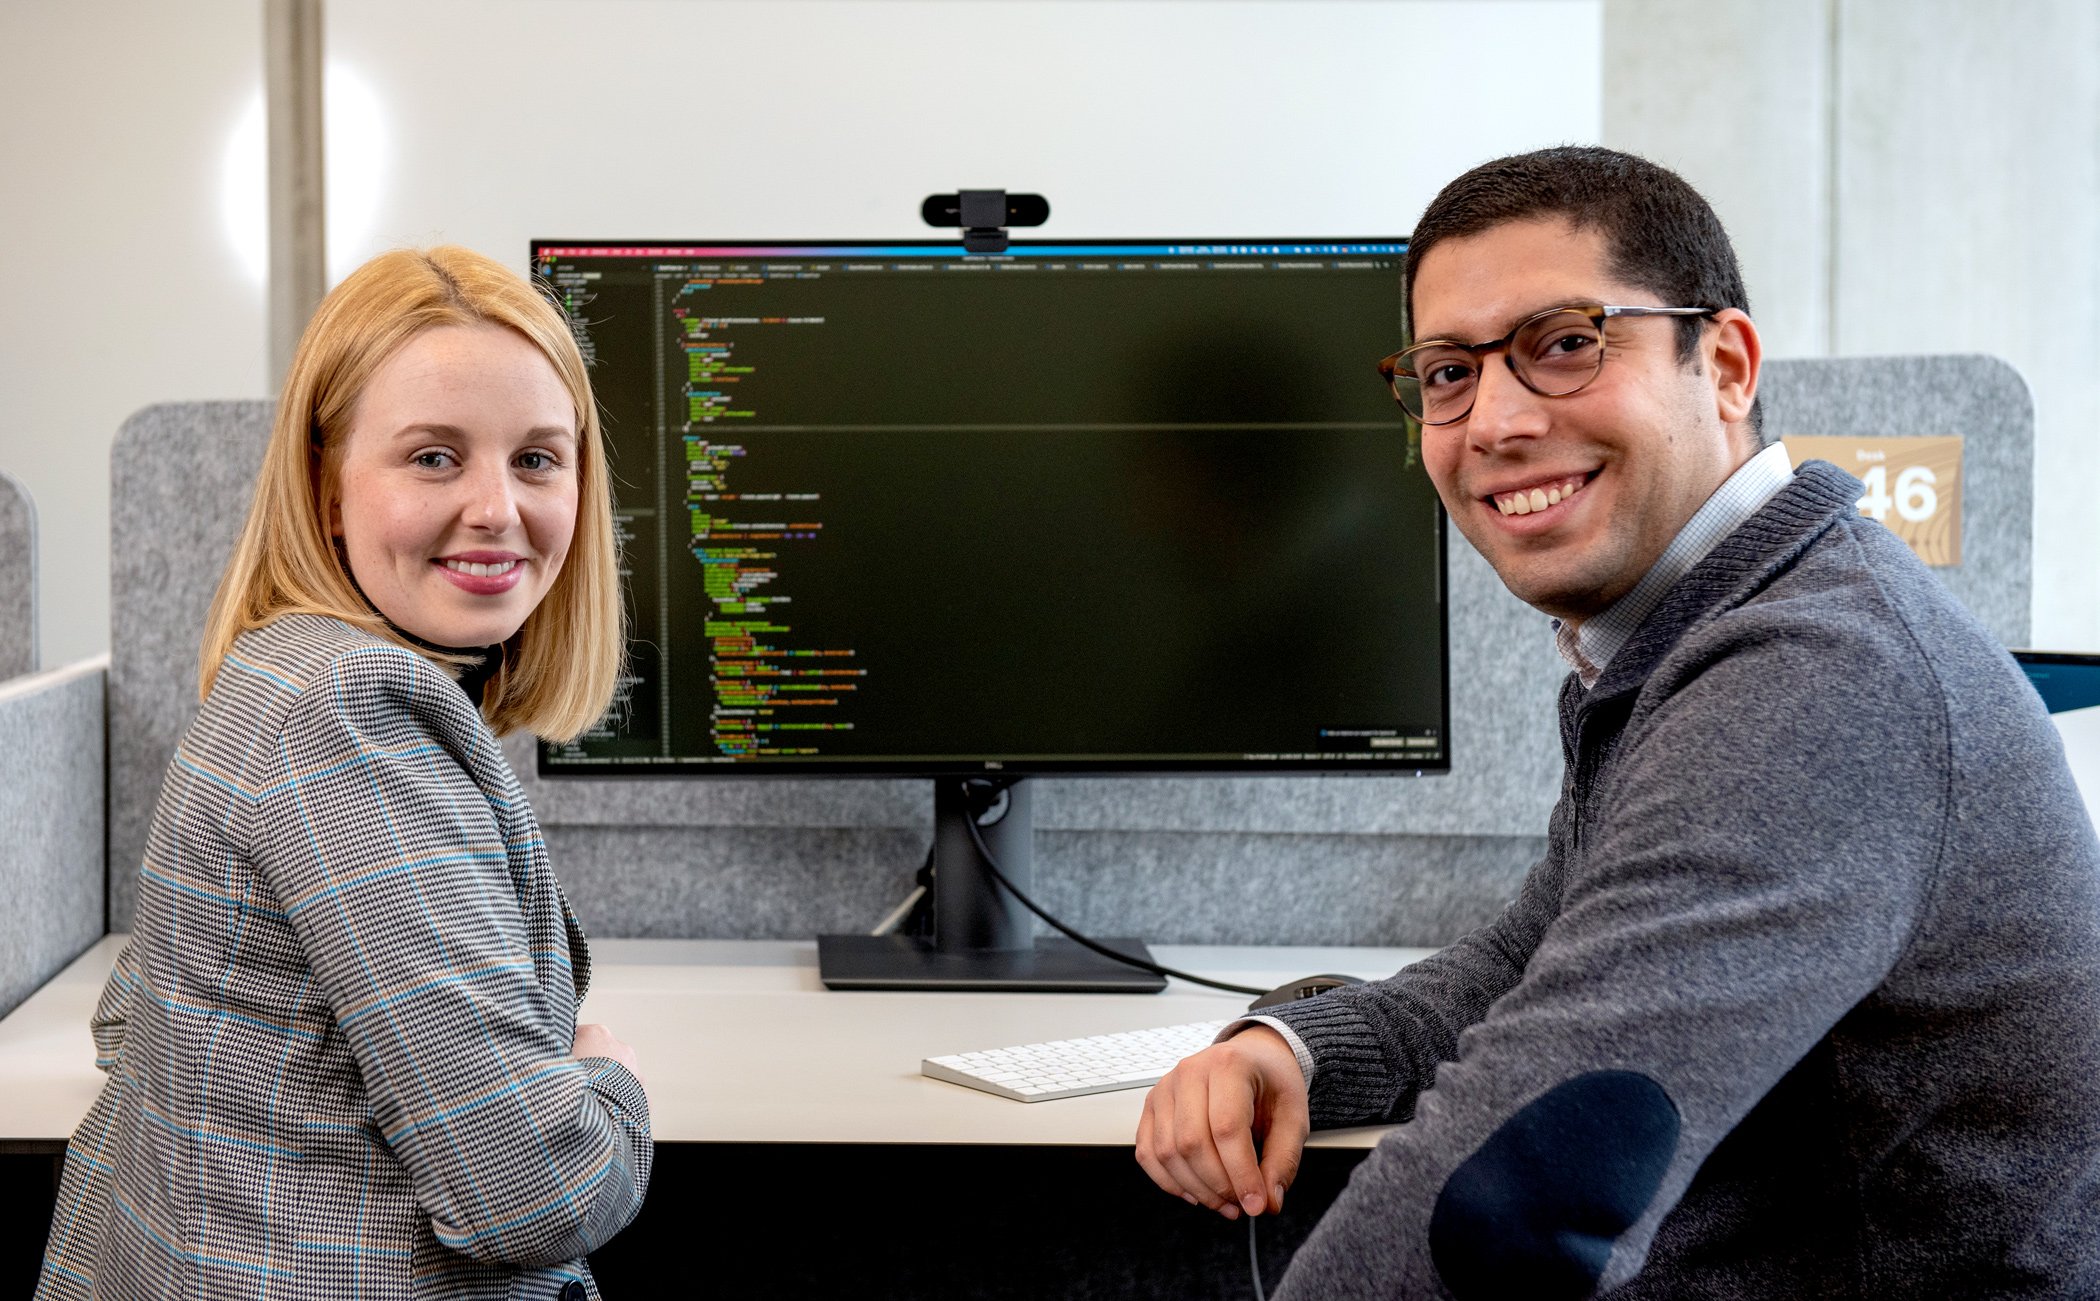 Two coworkers are sitting in front of computer with code on it